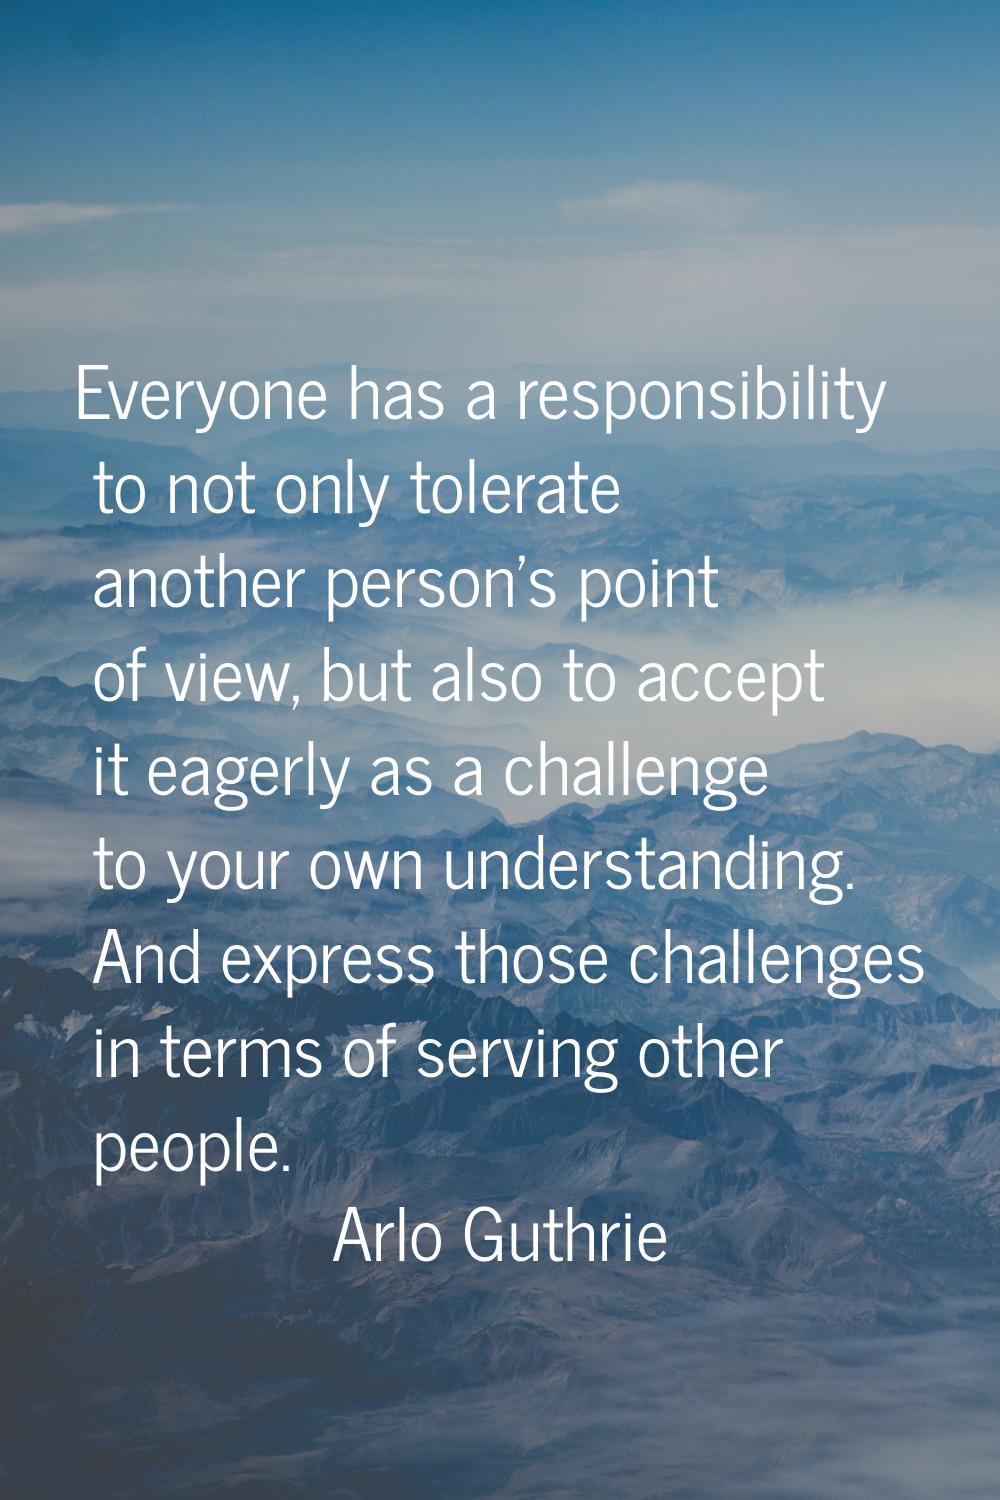 Everyone has a responsibility to not only tolerate another person's point of view, but also to acce